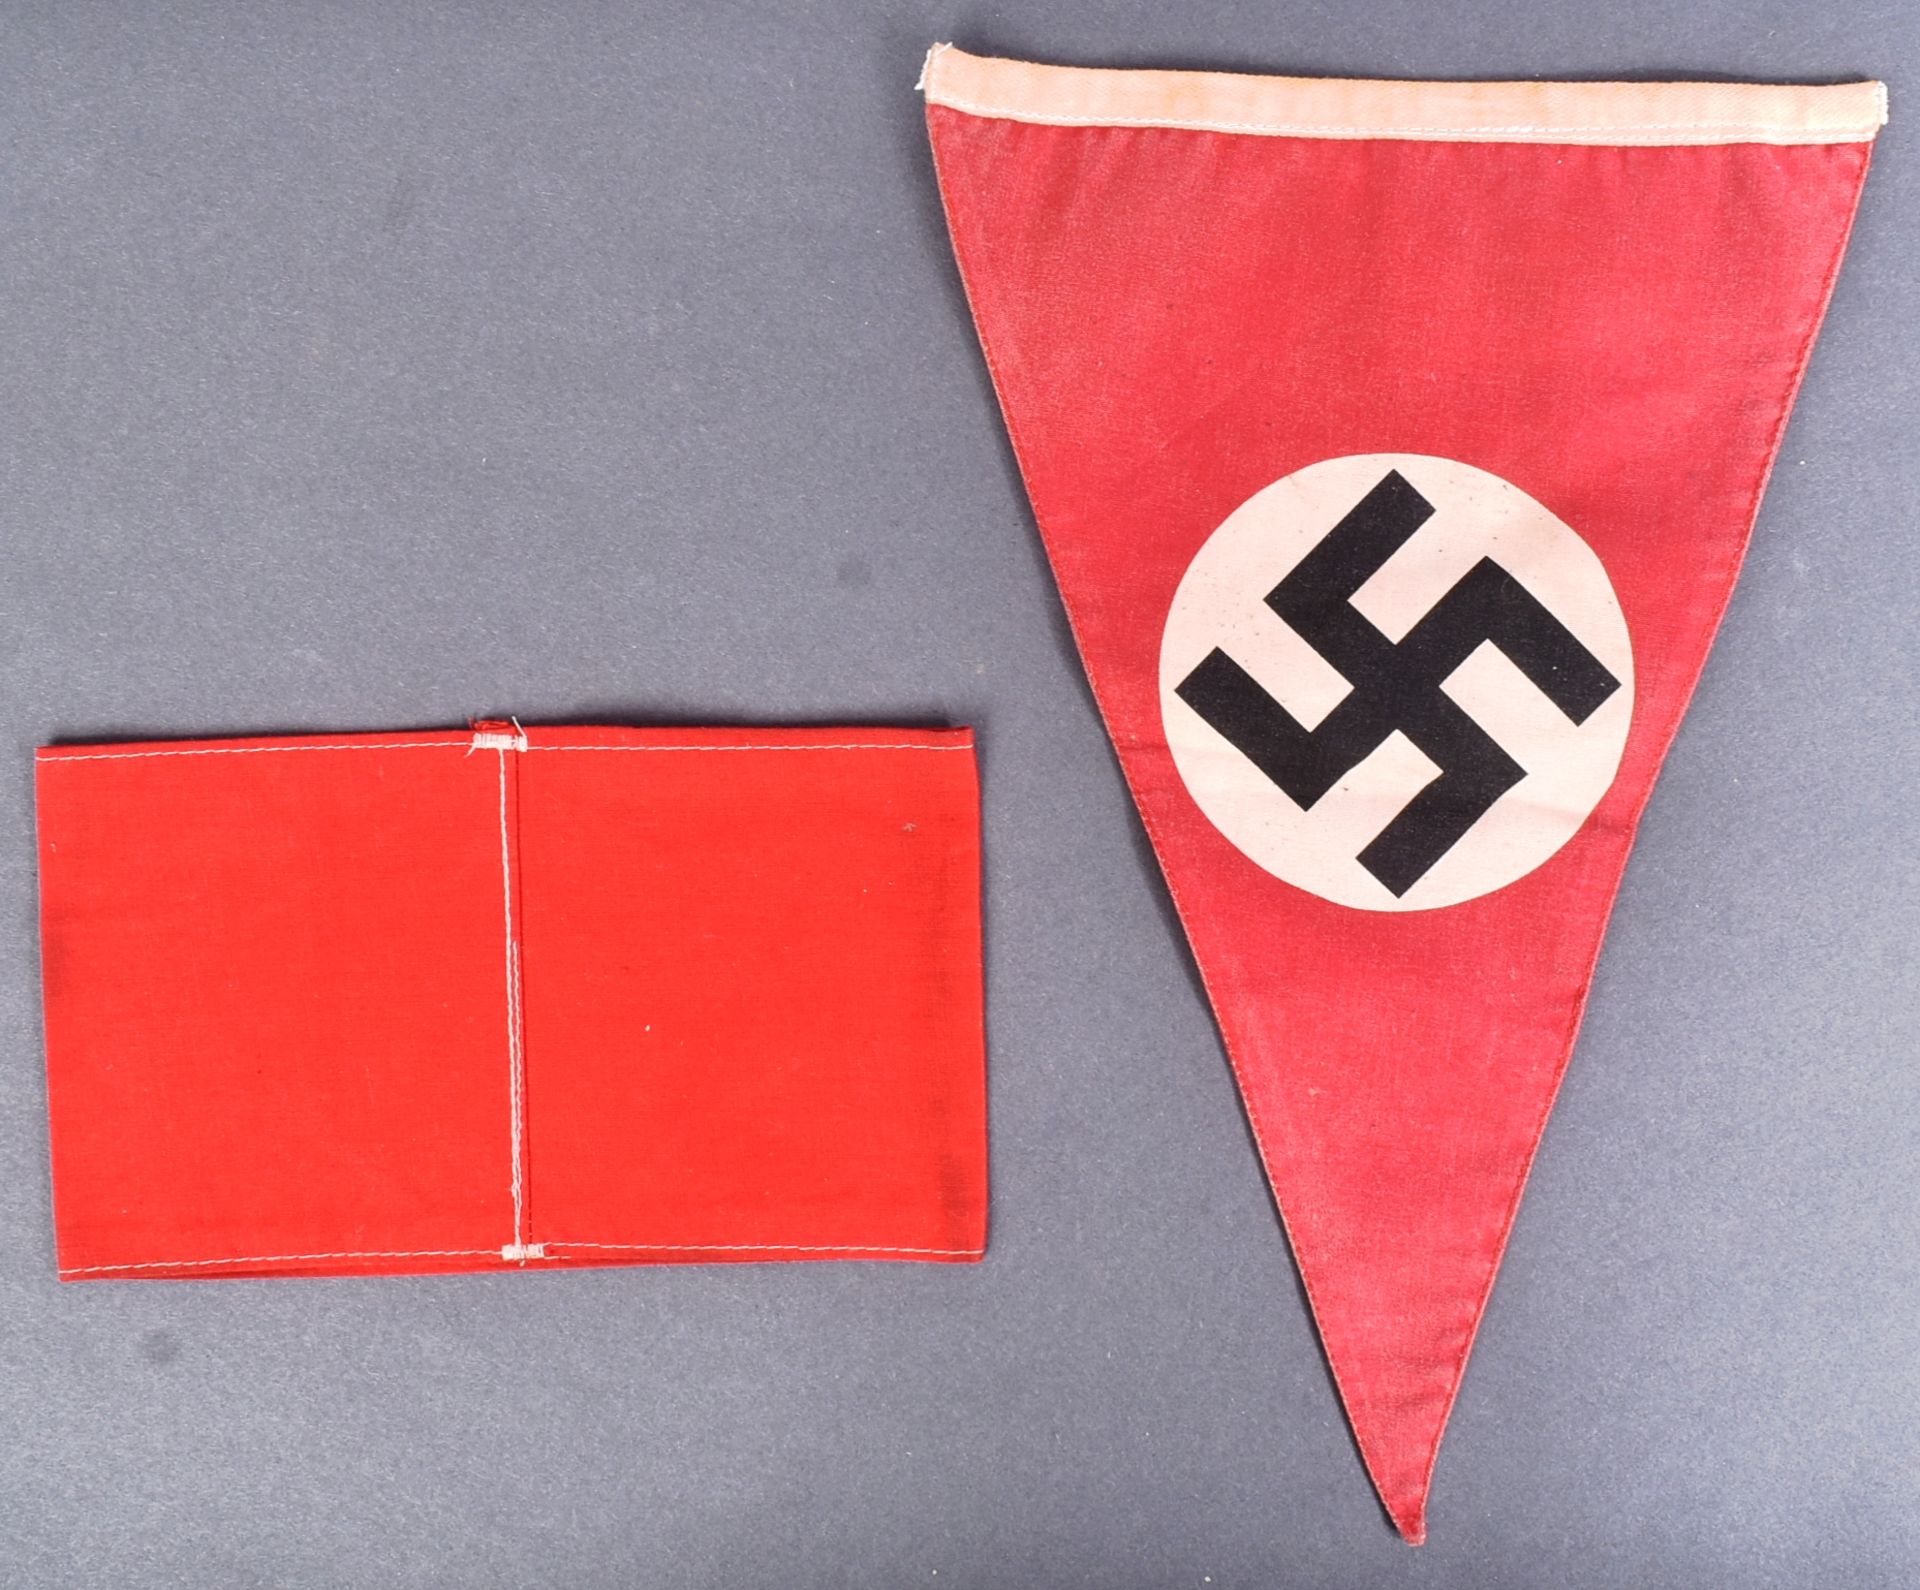 WWII SECOND WORLD WAR GERMAN NSDAP ARMBAND AND PENNANT FLAG - Image 4 of 4